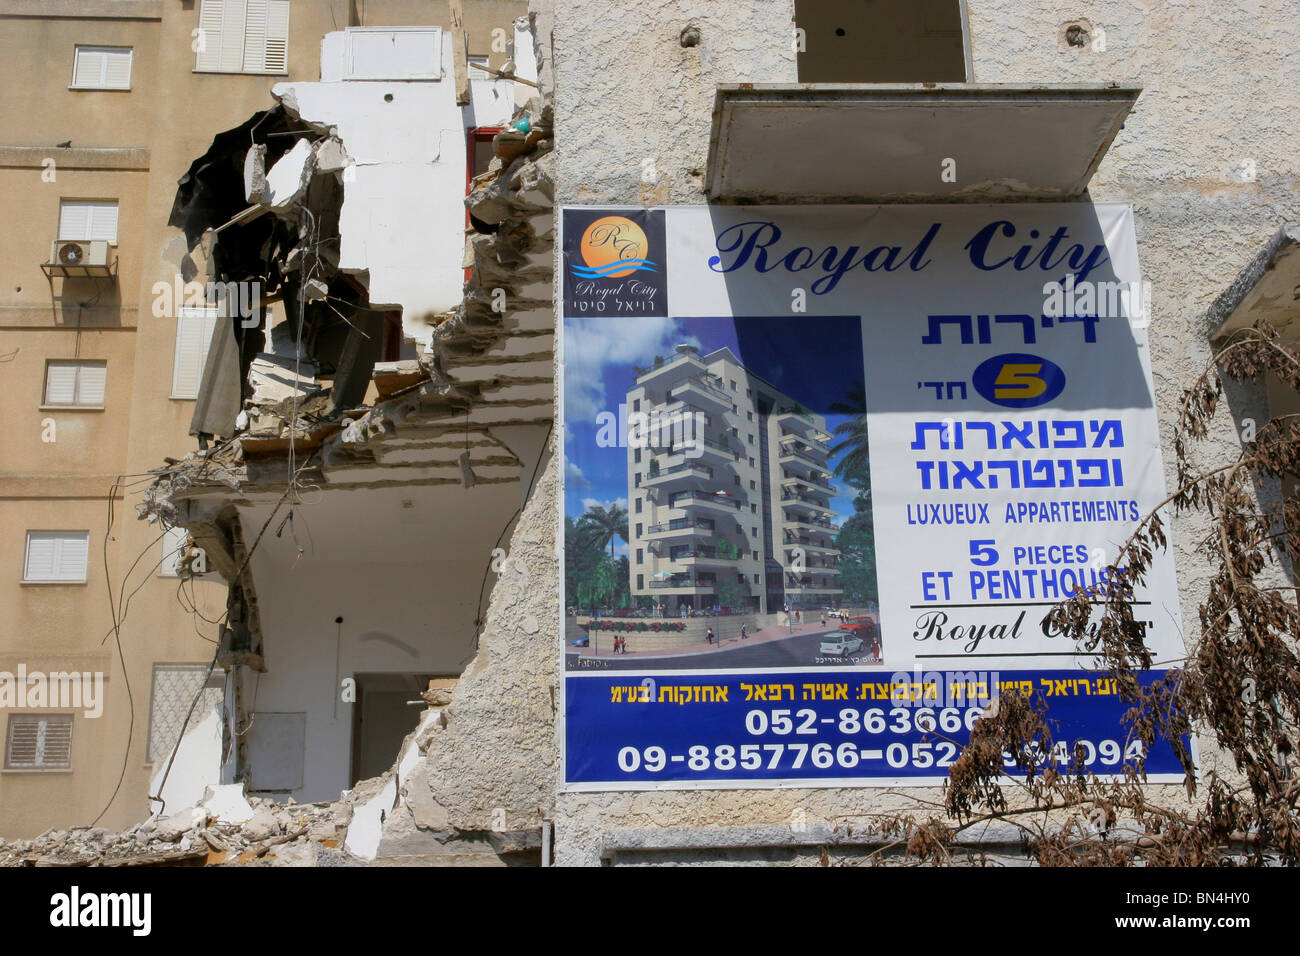 Israel, Natanya, The demolishing of an old building to make room for a new modern high-rise. Stock Photo